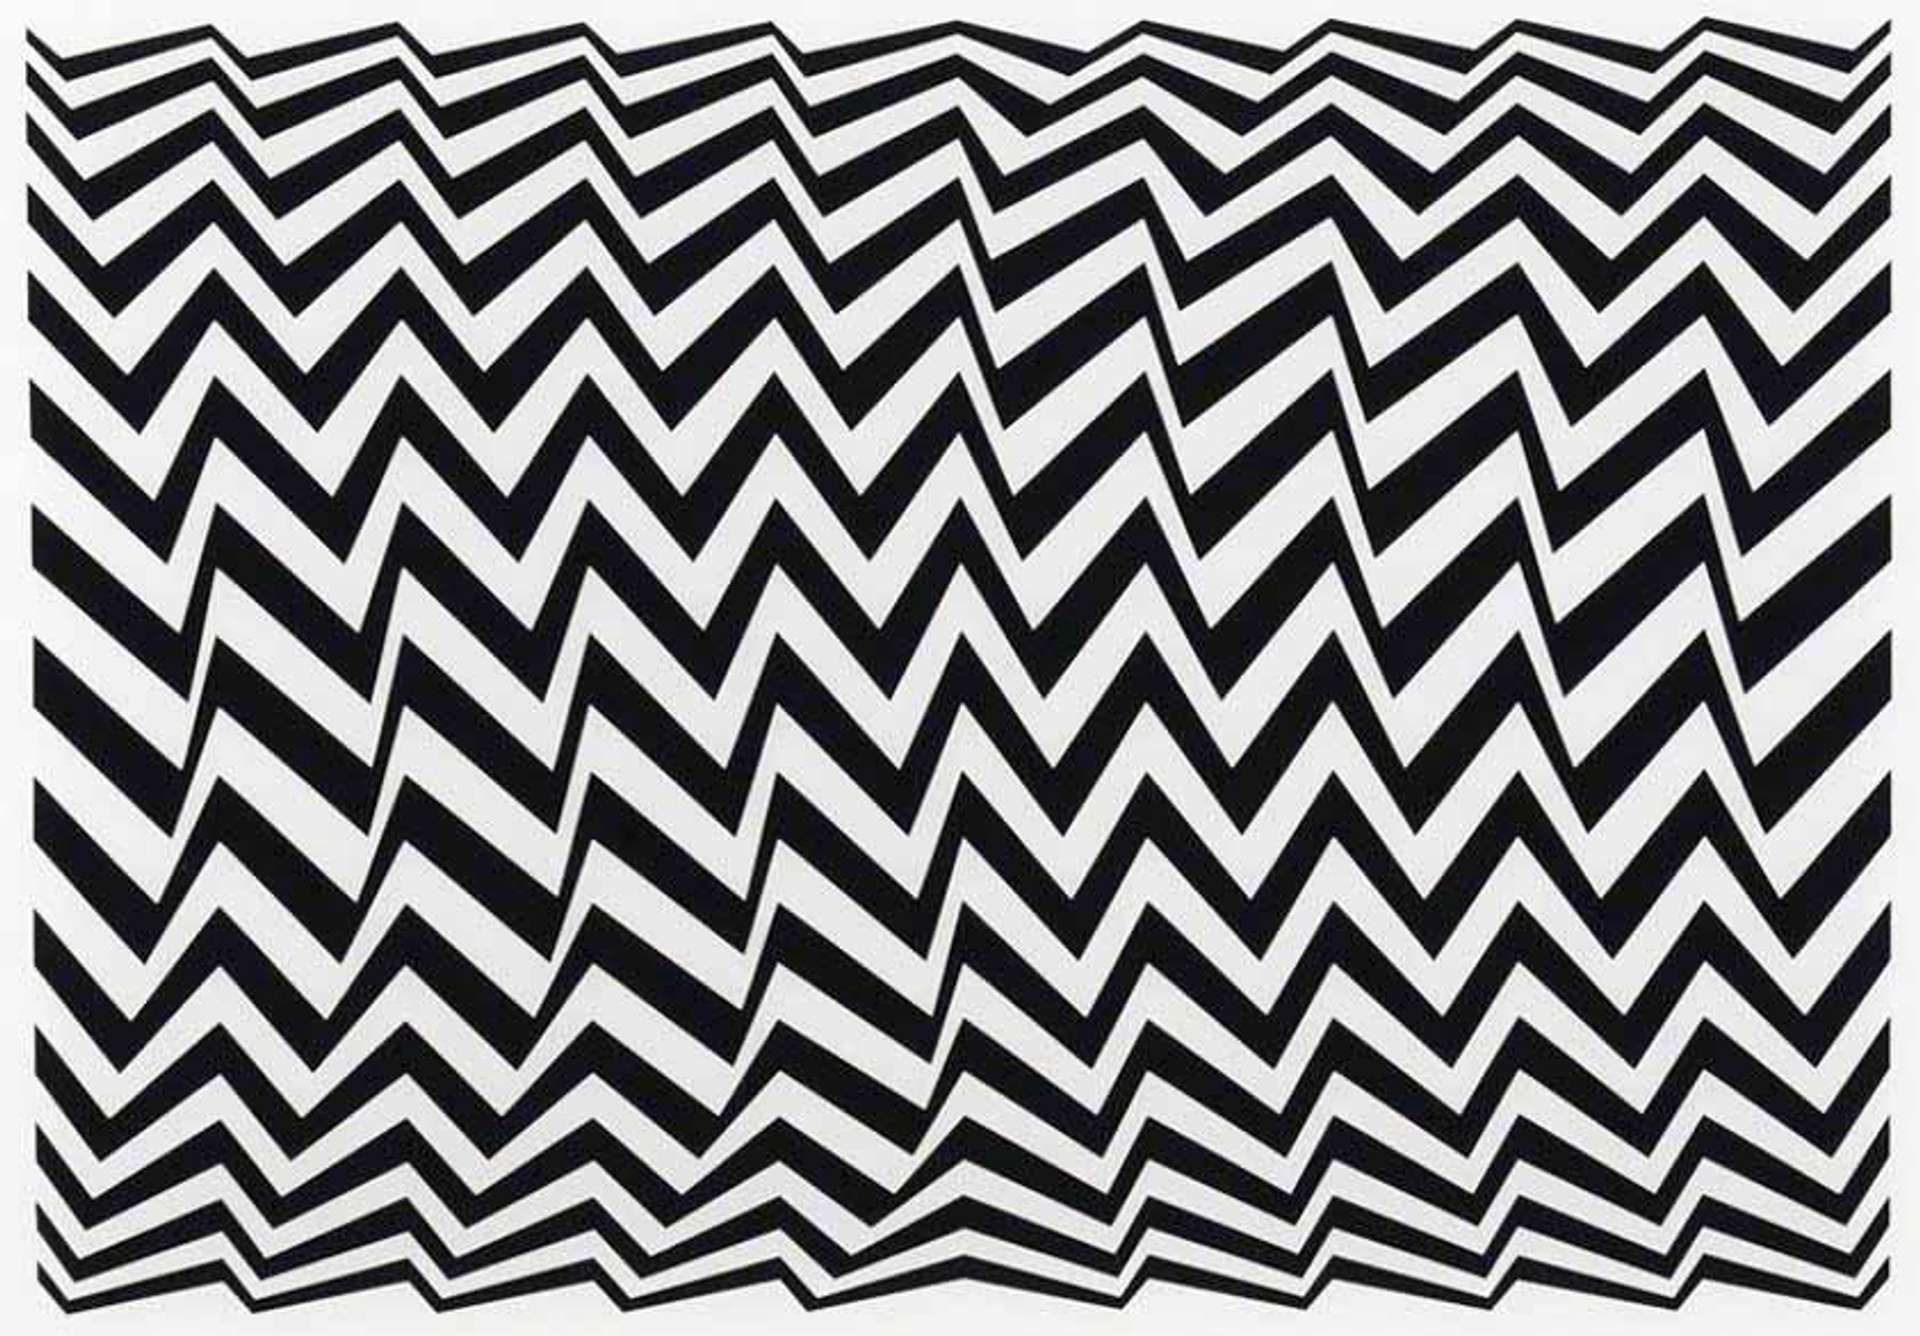 Creating a dizzying effect on the viewer, the patterns appear to oscillate and vibrate on the two-dimensional surface. In Fragment 3, a chevron form is repeated, with the angles of each chevron warped at different angles. As the pattern seems to move across the page, the viewer is disorientated: typical of Riley’s monochromatic, illusionistic works.